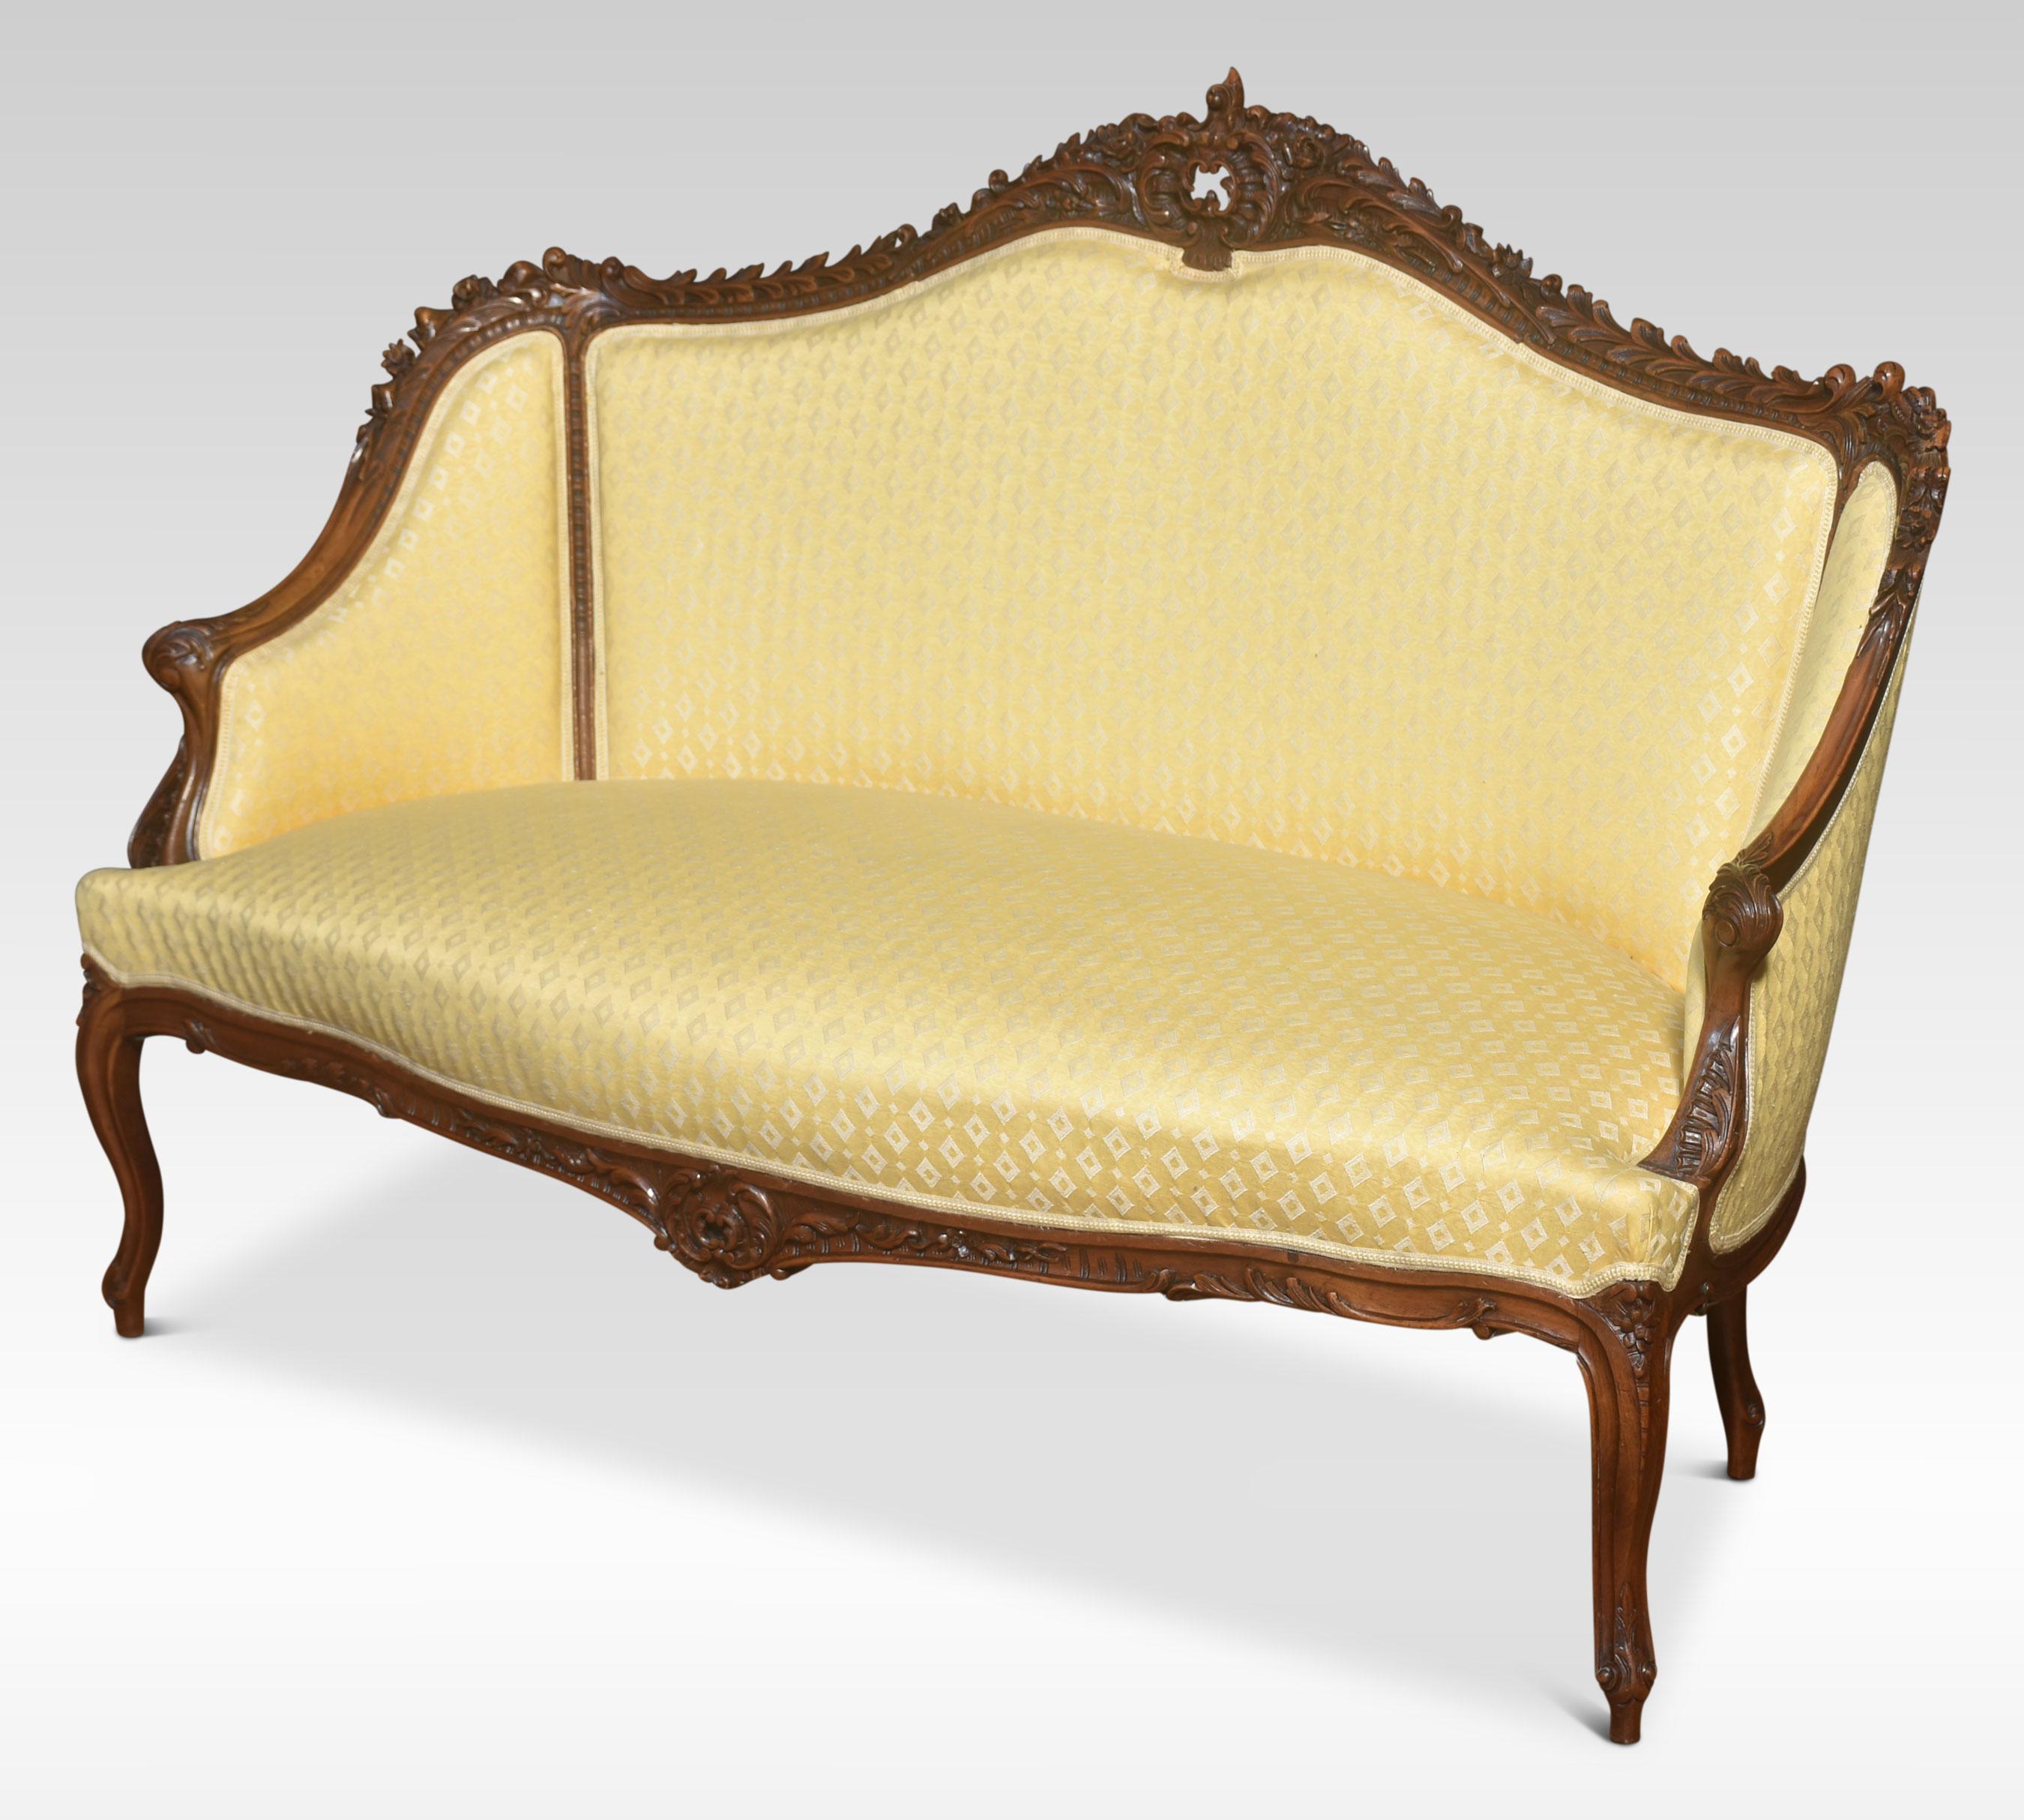 Walnut framed two-seater settee, the finely carved shaped frame above upholstered back and seat enclosed by out swept scrolling arms. All raised up on slender cabriole supports terminating in scrolling toes.
Dimensions
Height 40 Inches height to